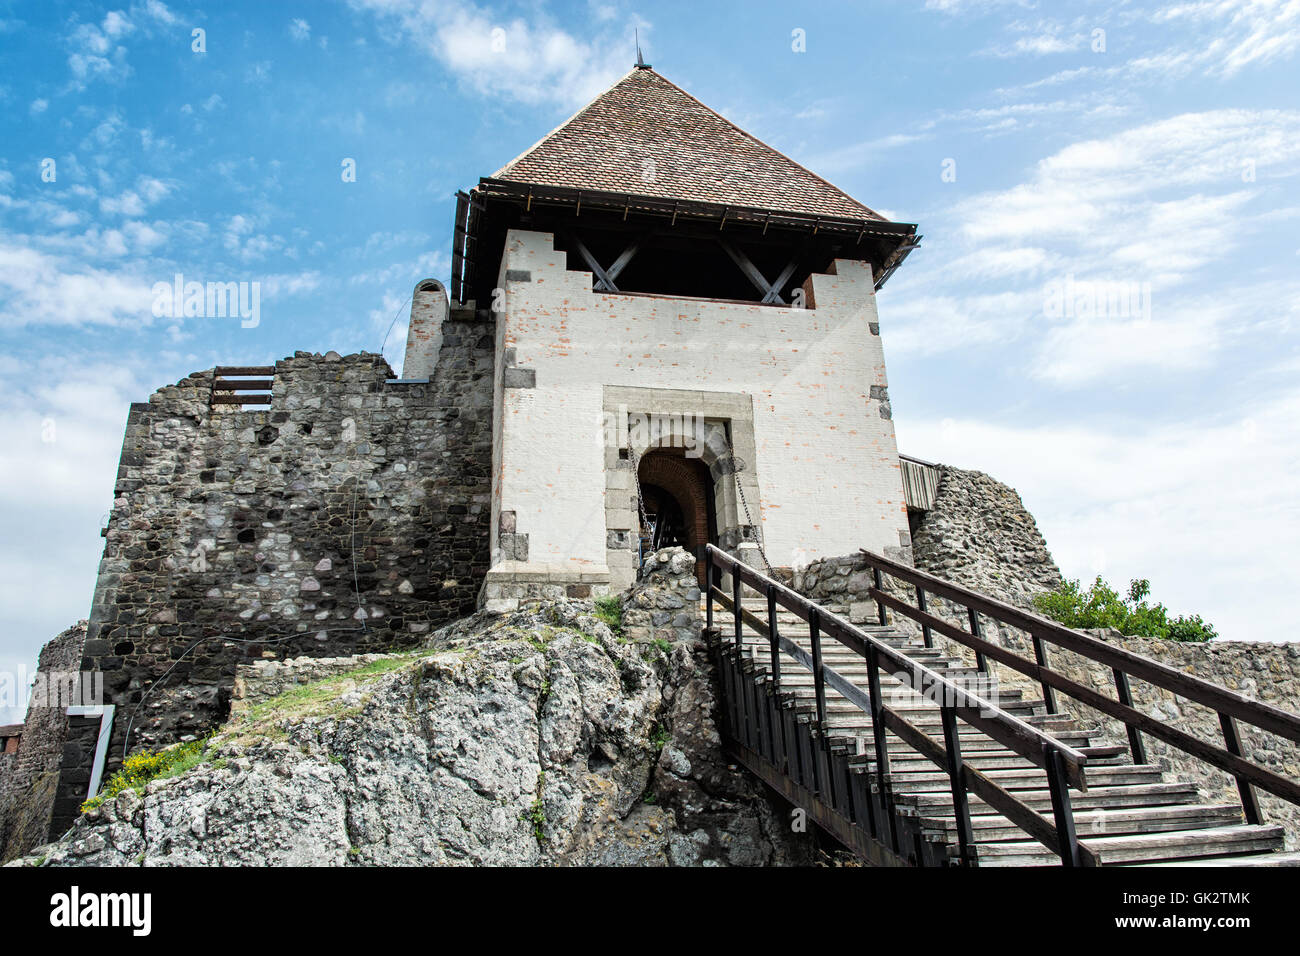 Ruin castle of Visegrad, Hungary. Ancient architecture with stairs. Travel destination. Cultural heritage. Stock Photo